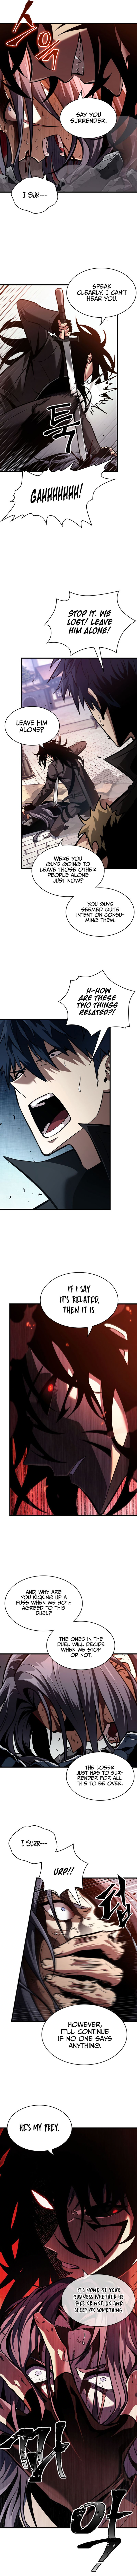 Pick Me Up Chapter 17 page 5